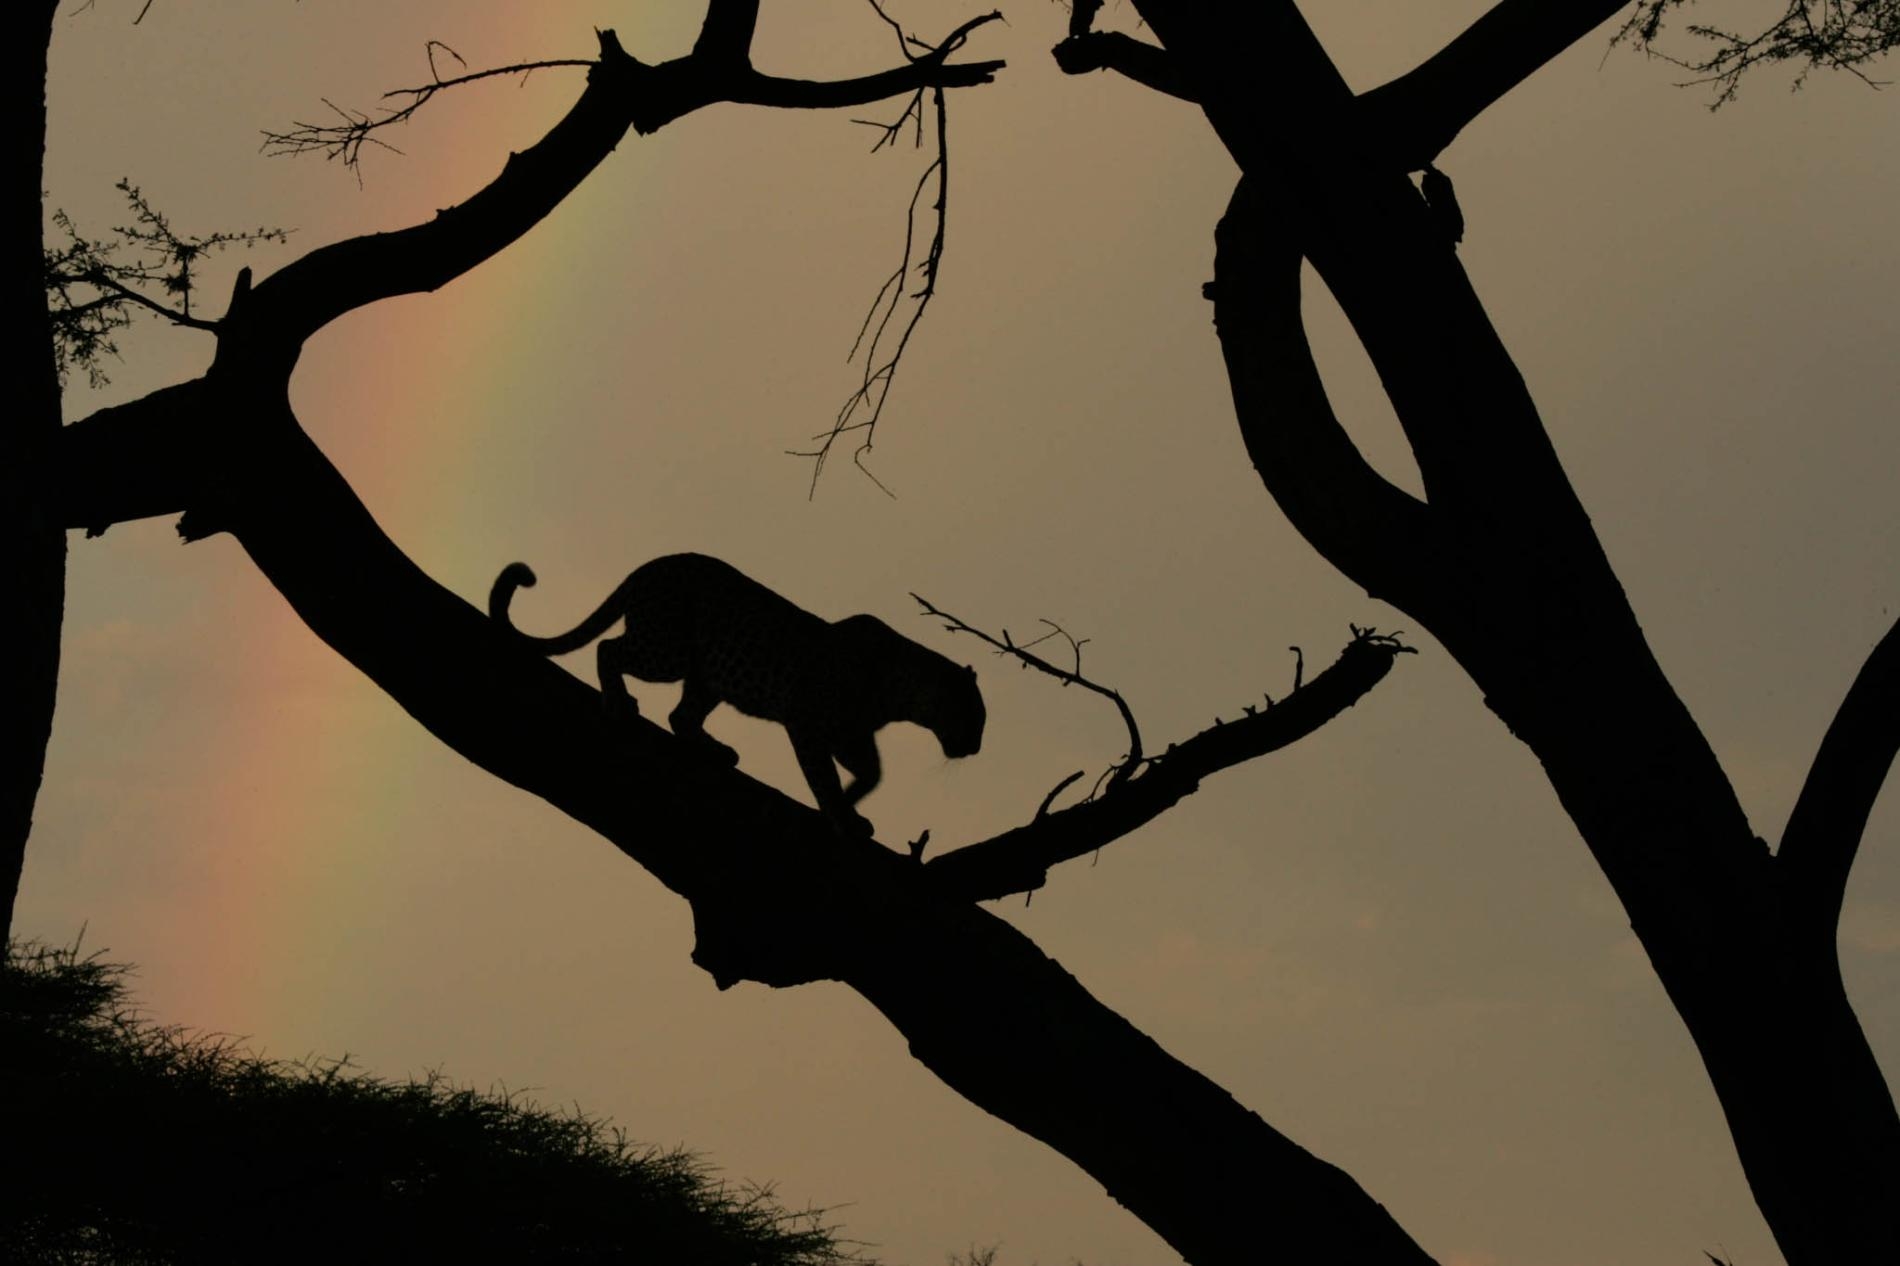 Photograph by Beverly Joubert, Nat Geo Image Collection